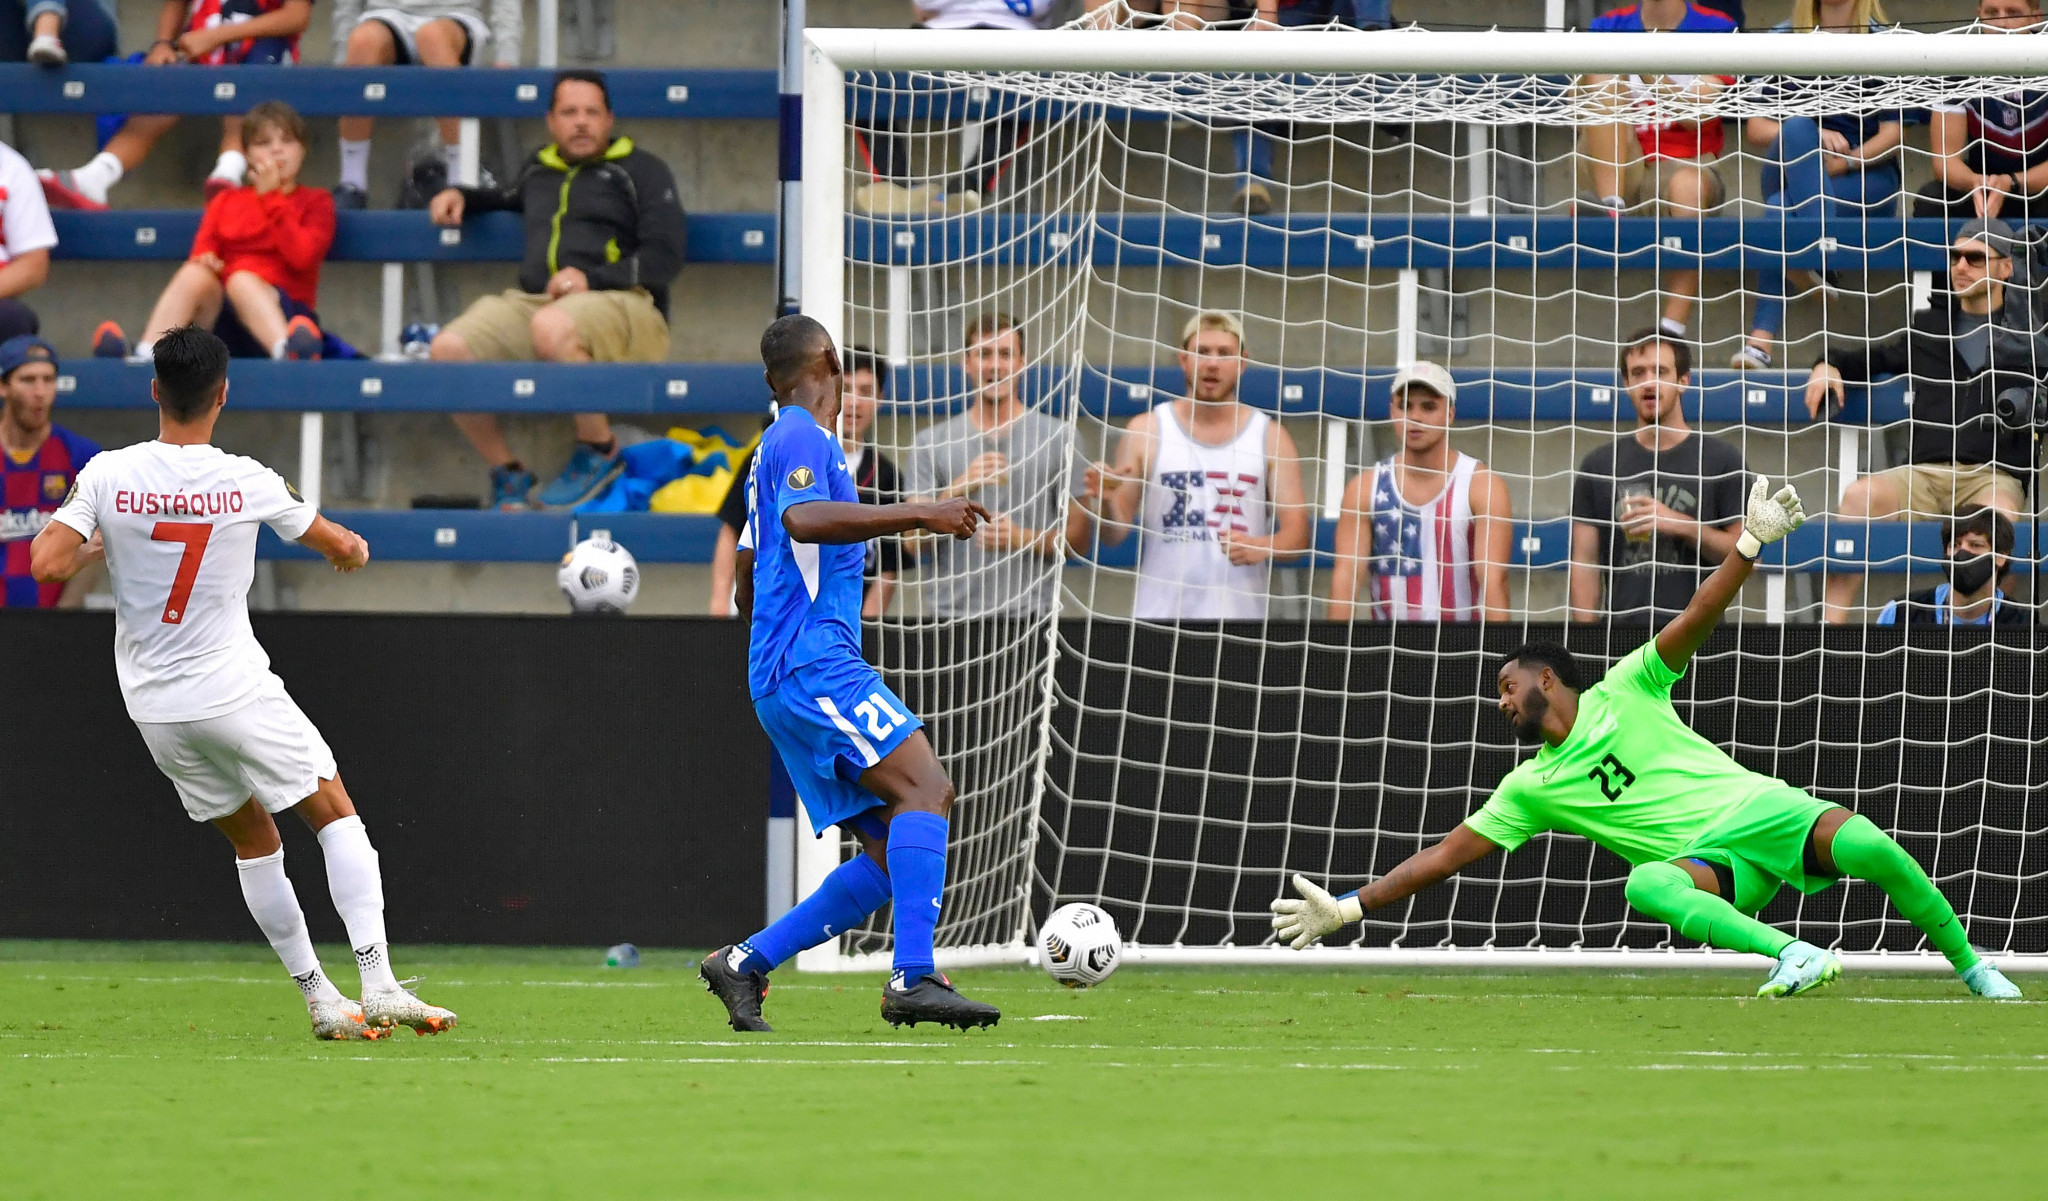 Canada came from a goal down to beat Martinique 4-1 in the earlier match at Children’s Mercy Park in Kansas City ©Getty Images